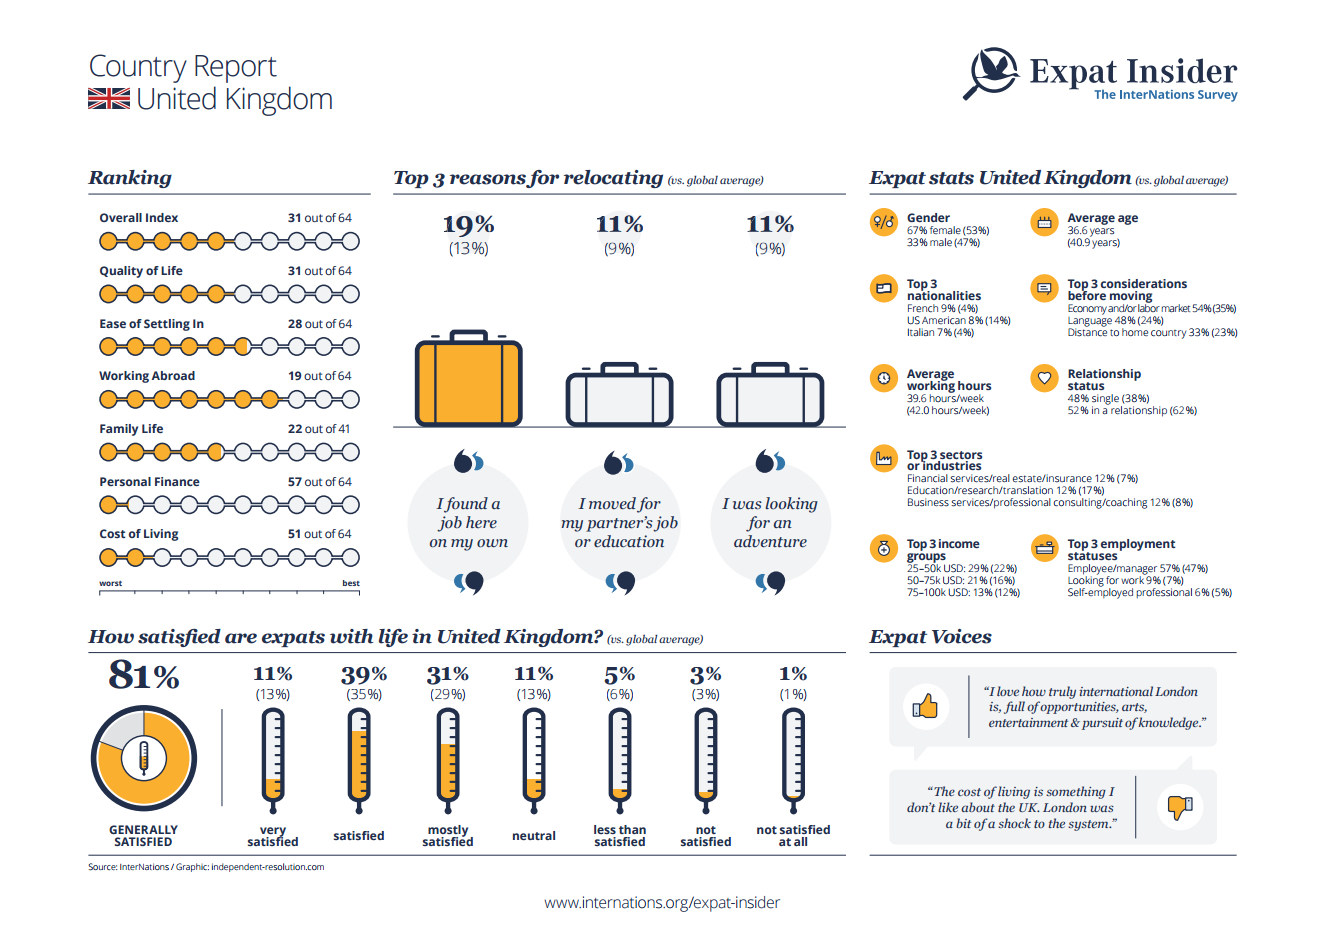 Expat statistics for the UK - infographic